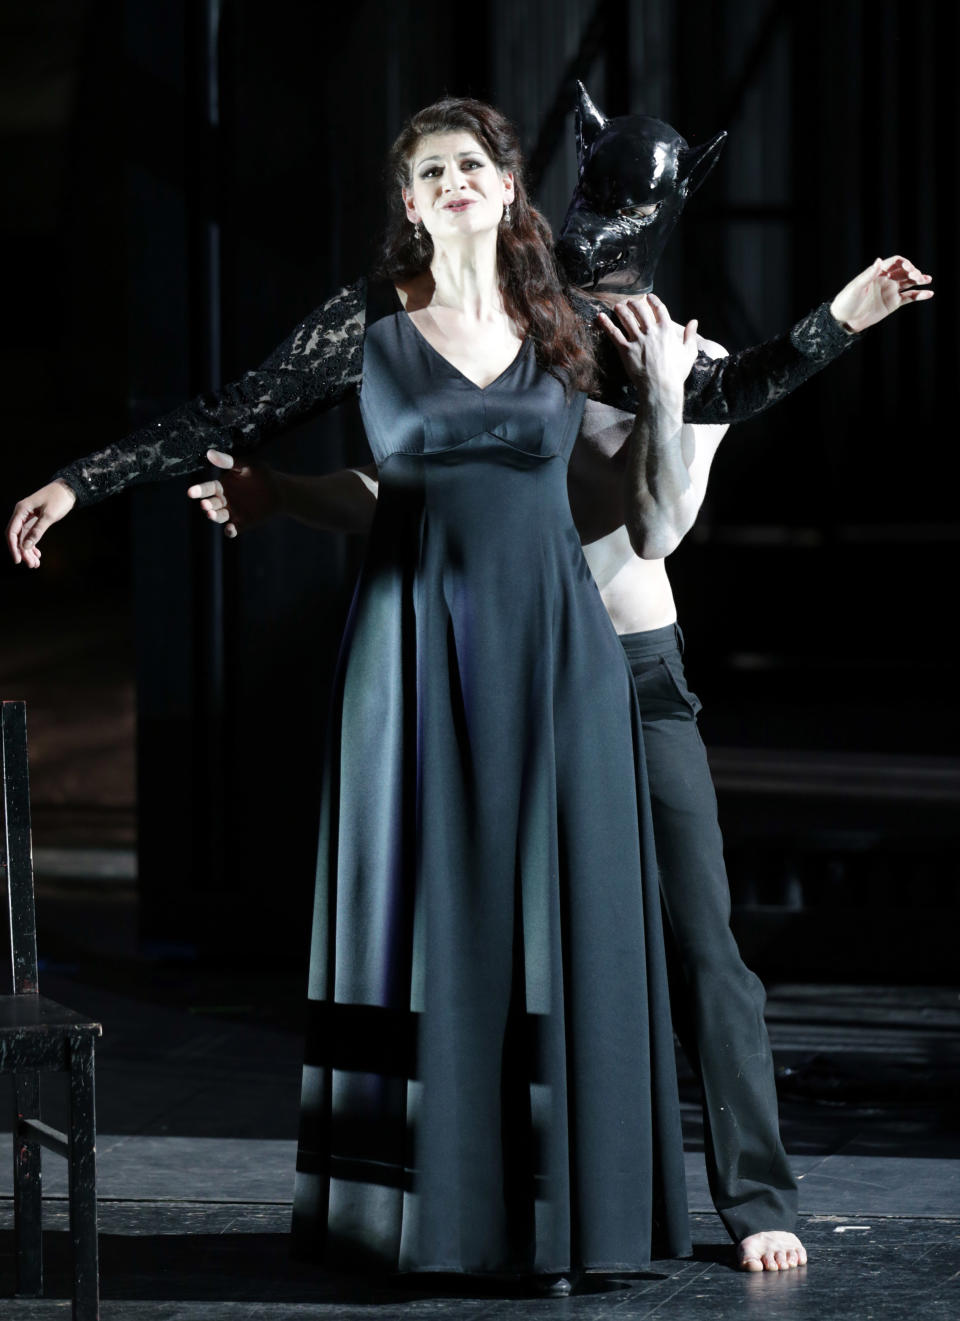 In this picture taken Friday, June 21, 2013, Anja Harteros in the role of Leonora sings during a dress rehearsal for the opera "Il Trovatore" by Giuseppe Verdi in the Bavarian State Opera House in Munich, southern Germany. This wild new production by Olivier Py opened the company's annual Munich Opera Festival. It's a non-stop barrage of nightmarish images mixing styles and periods that assault the audience at lightning speed on a multi-tiered revolving set. (AP Photo/Matthias Schrader)